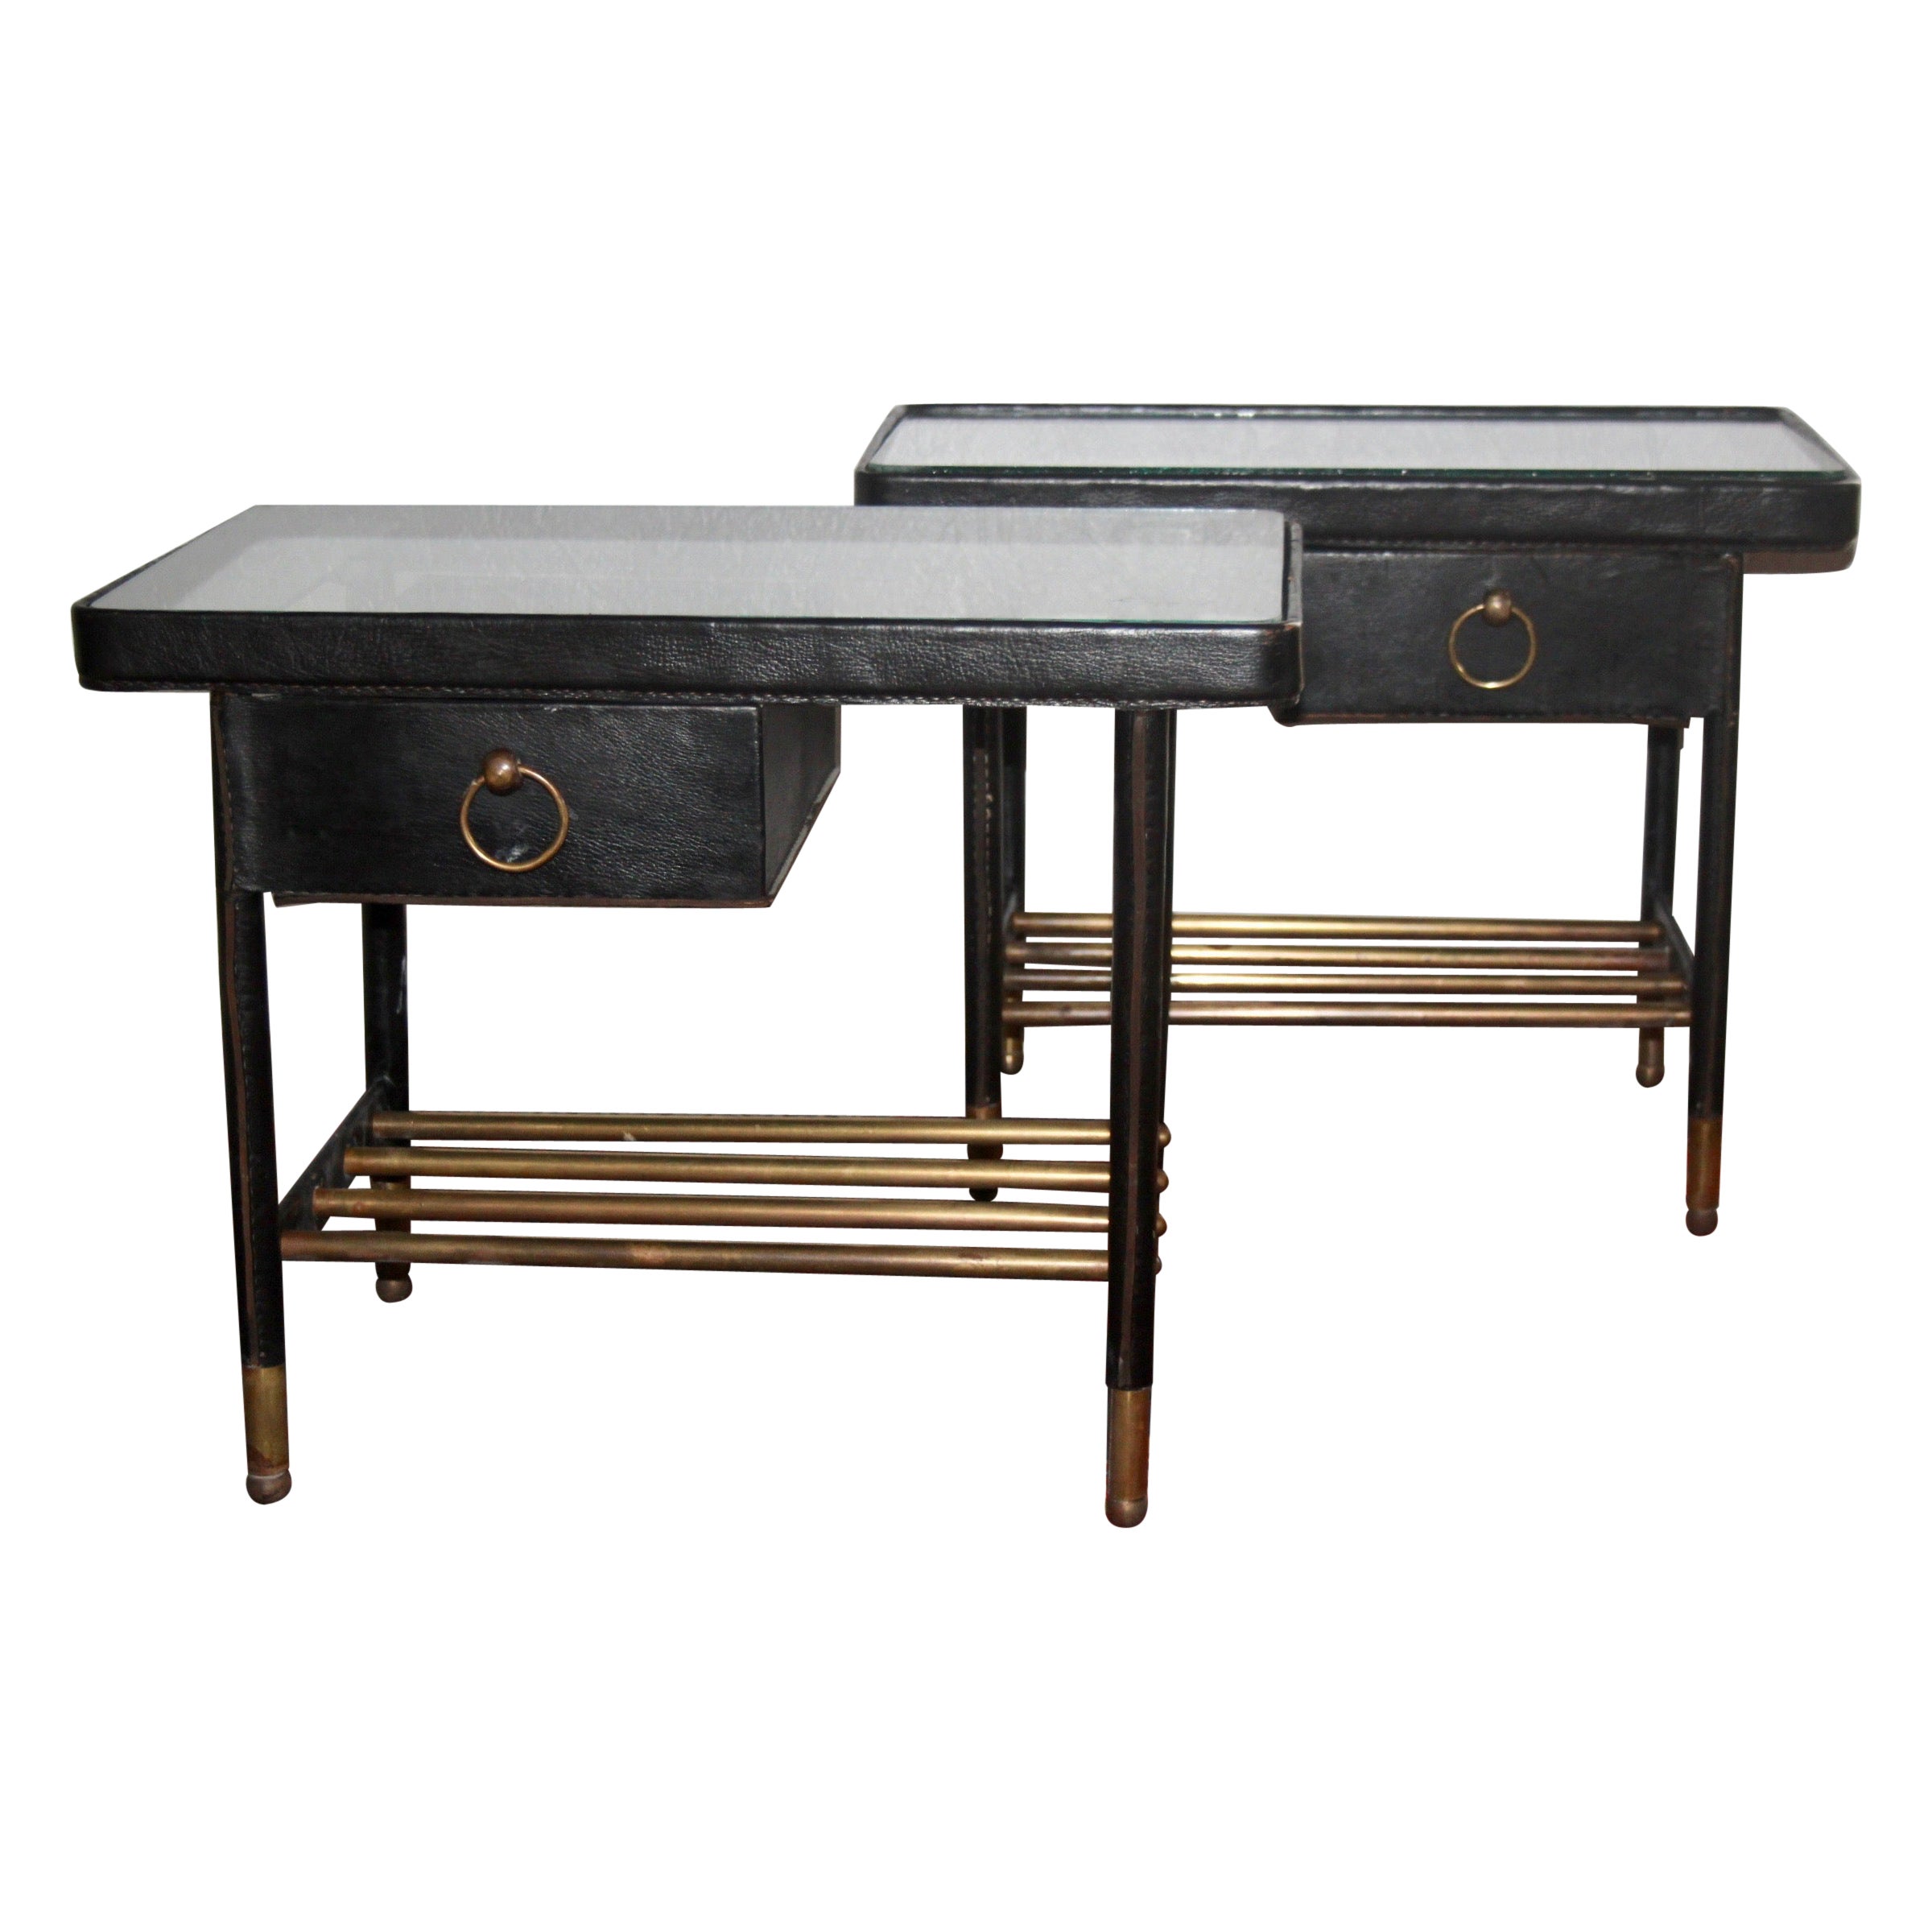 Jacques Adnet Hand-Stitched Black Leather pair of Night Stand, 1950's France